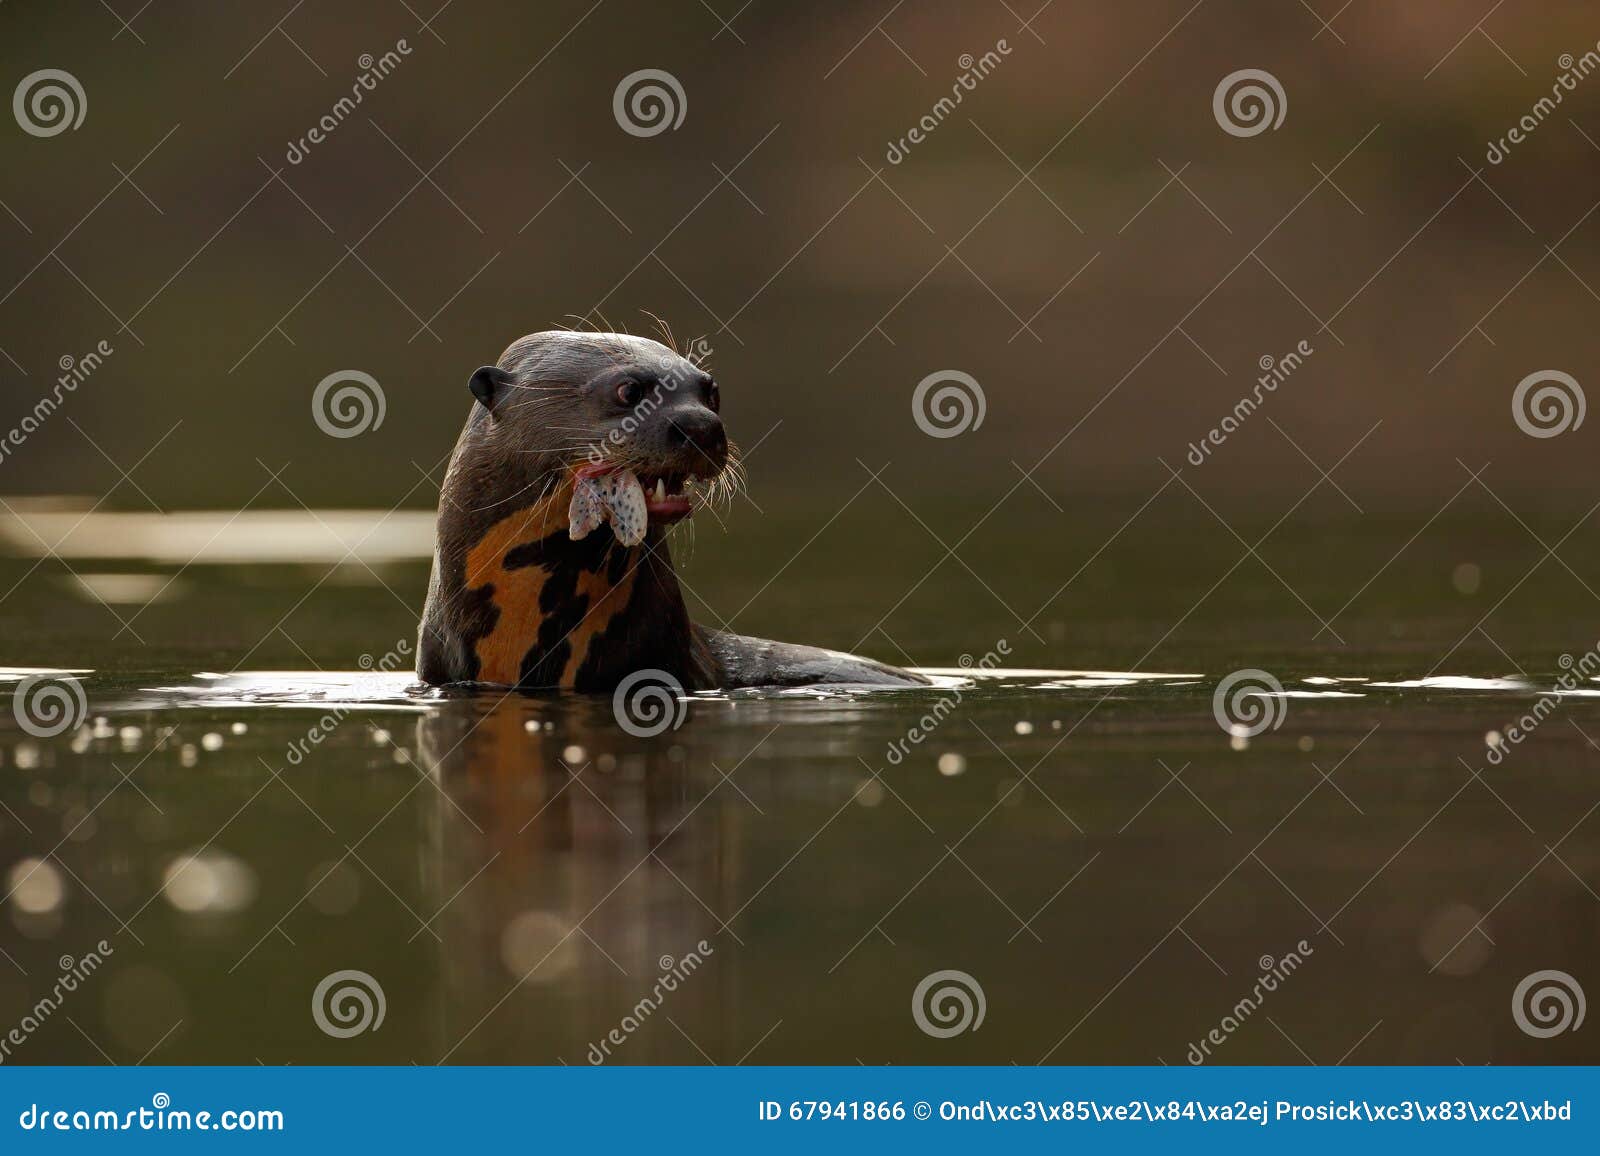 giant otter, pteronura brasiliensis, portrait in the river water with fish in mouth, rio negro, pantanal, brazil